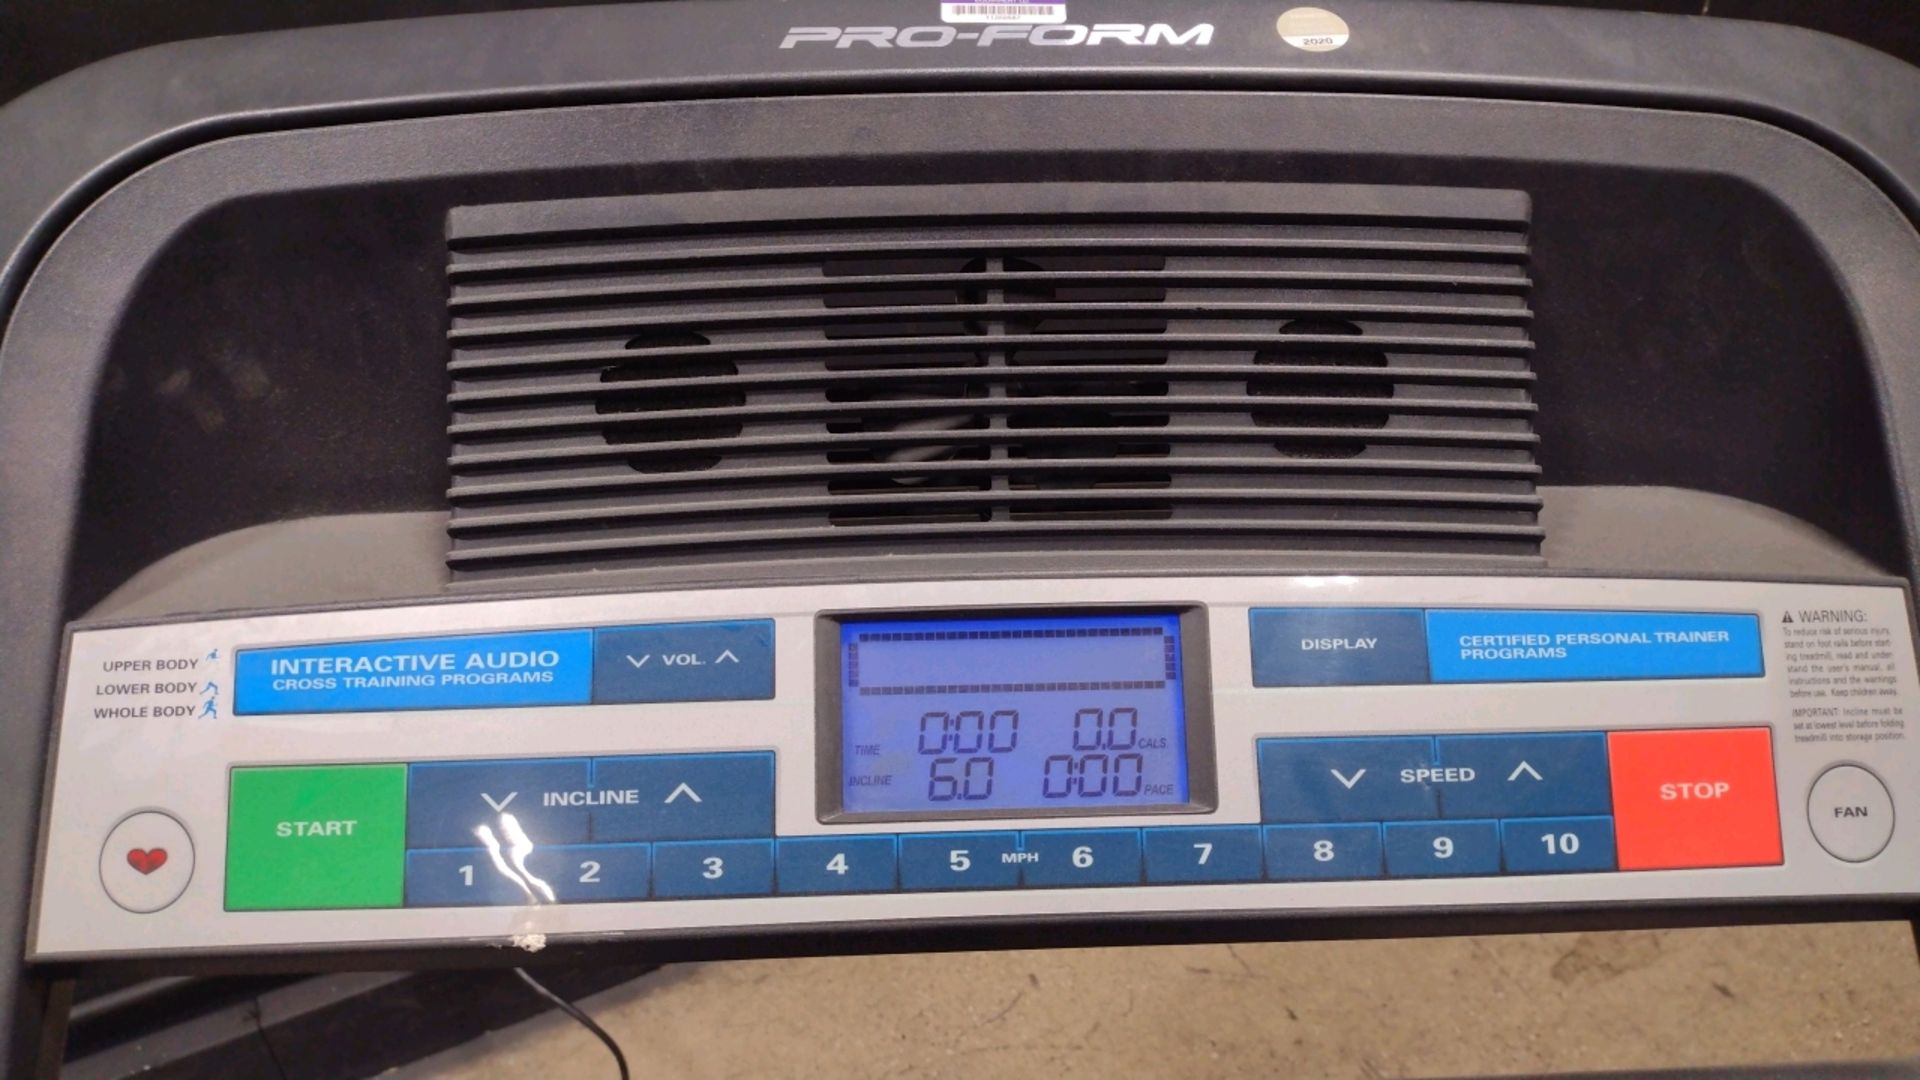 PRO FORM 675 CROSSTRAINER TREADMILL (LOCATED AT 3325 MOUNT PROSPECT ROAD, FRANKLIN PARK, IL, 60131) - Image 2 of 2